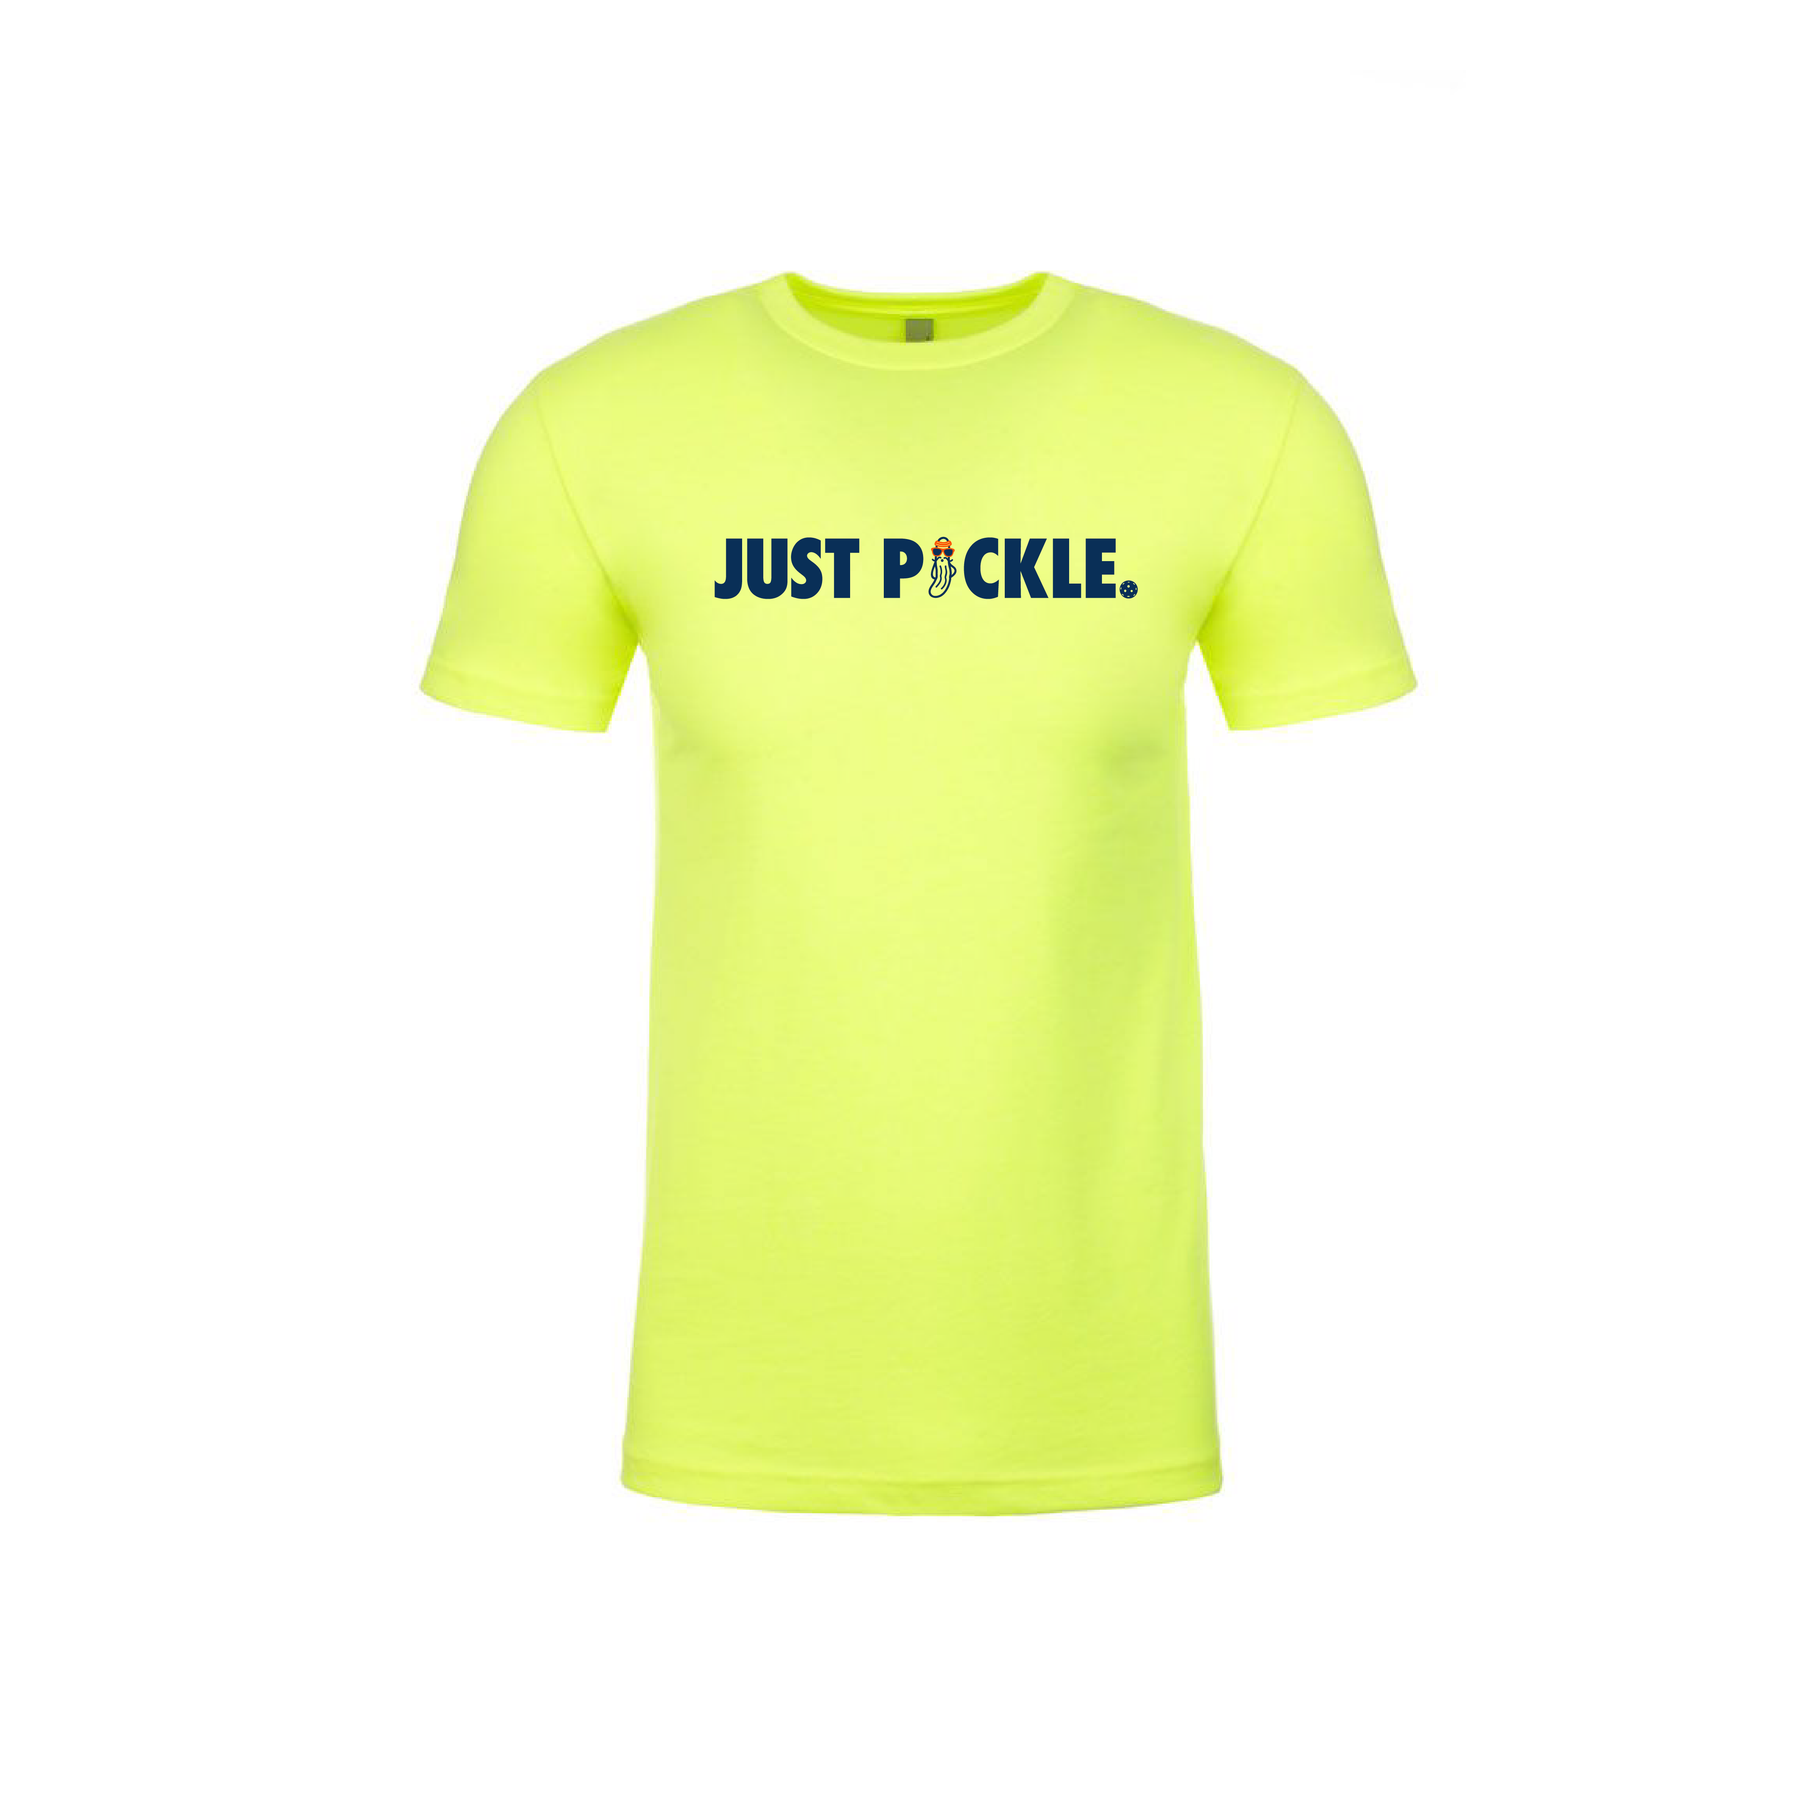 JUST PICKLE. (Neon Yellow/Navy)